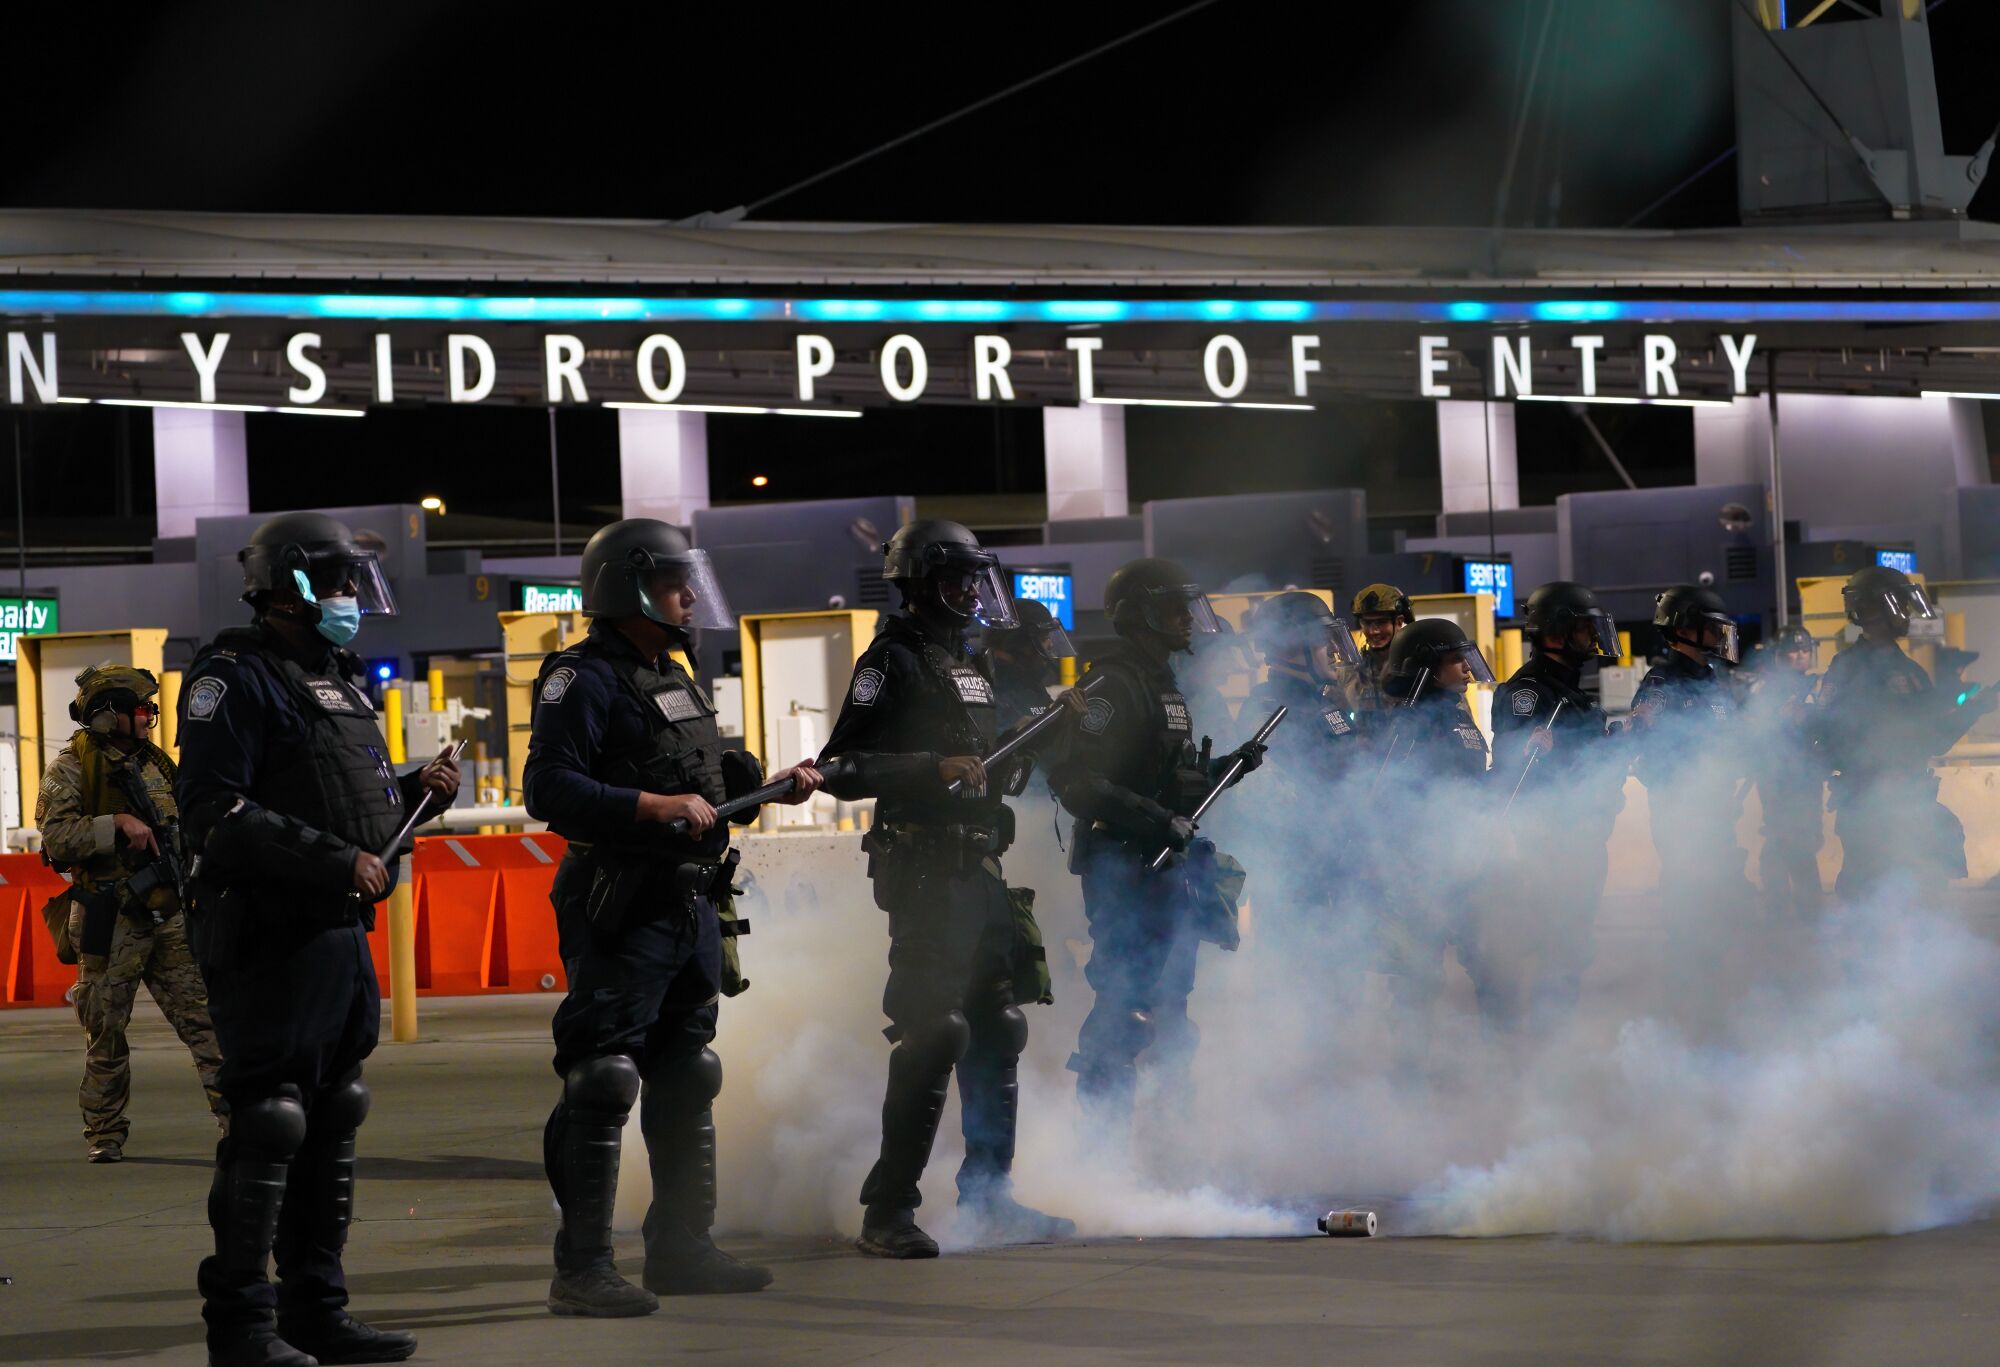 Agents from the U.S. Customs and Border Protection at San Ysidro Port of Entry conduct a brief training exercise